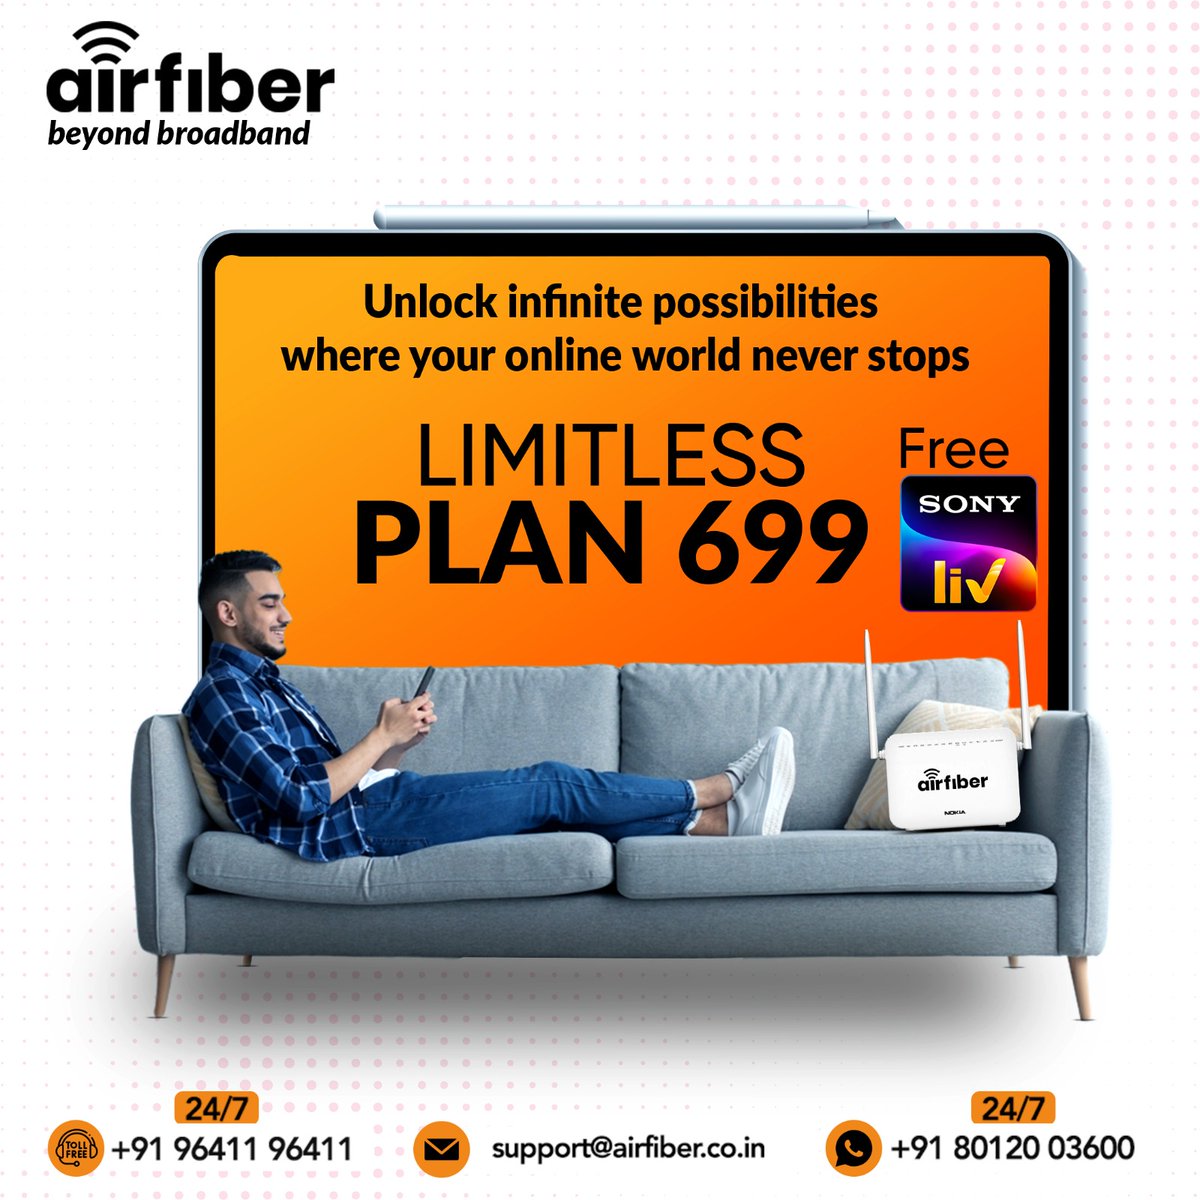 Go unlimited for just ₹699! 📷 Enjoy endless streaming, browsing, and more without any interruptions!
#Hosur | #InternetService | #FastInternetSpeed | #Airfiber | #smartservice | #Offer | #NewLaunch | #24HoursSupport | #SunNXT | #password | #safetytips | #wifipassword | #wifi |